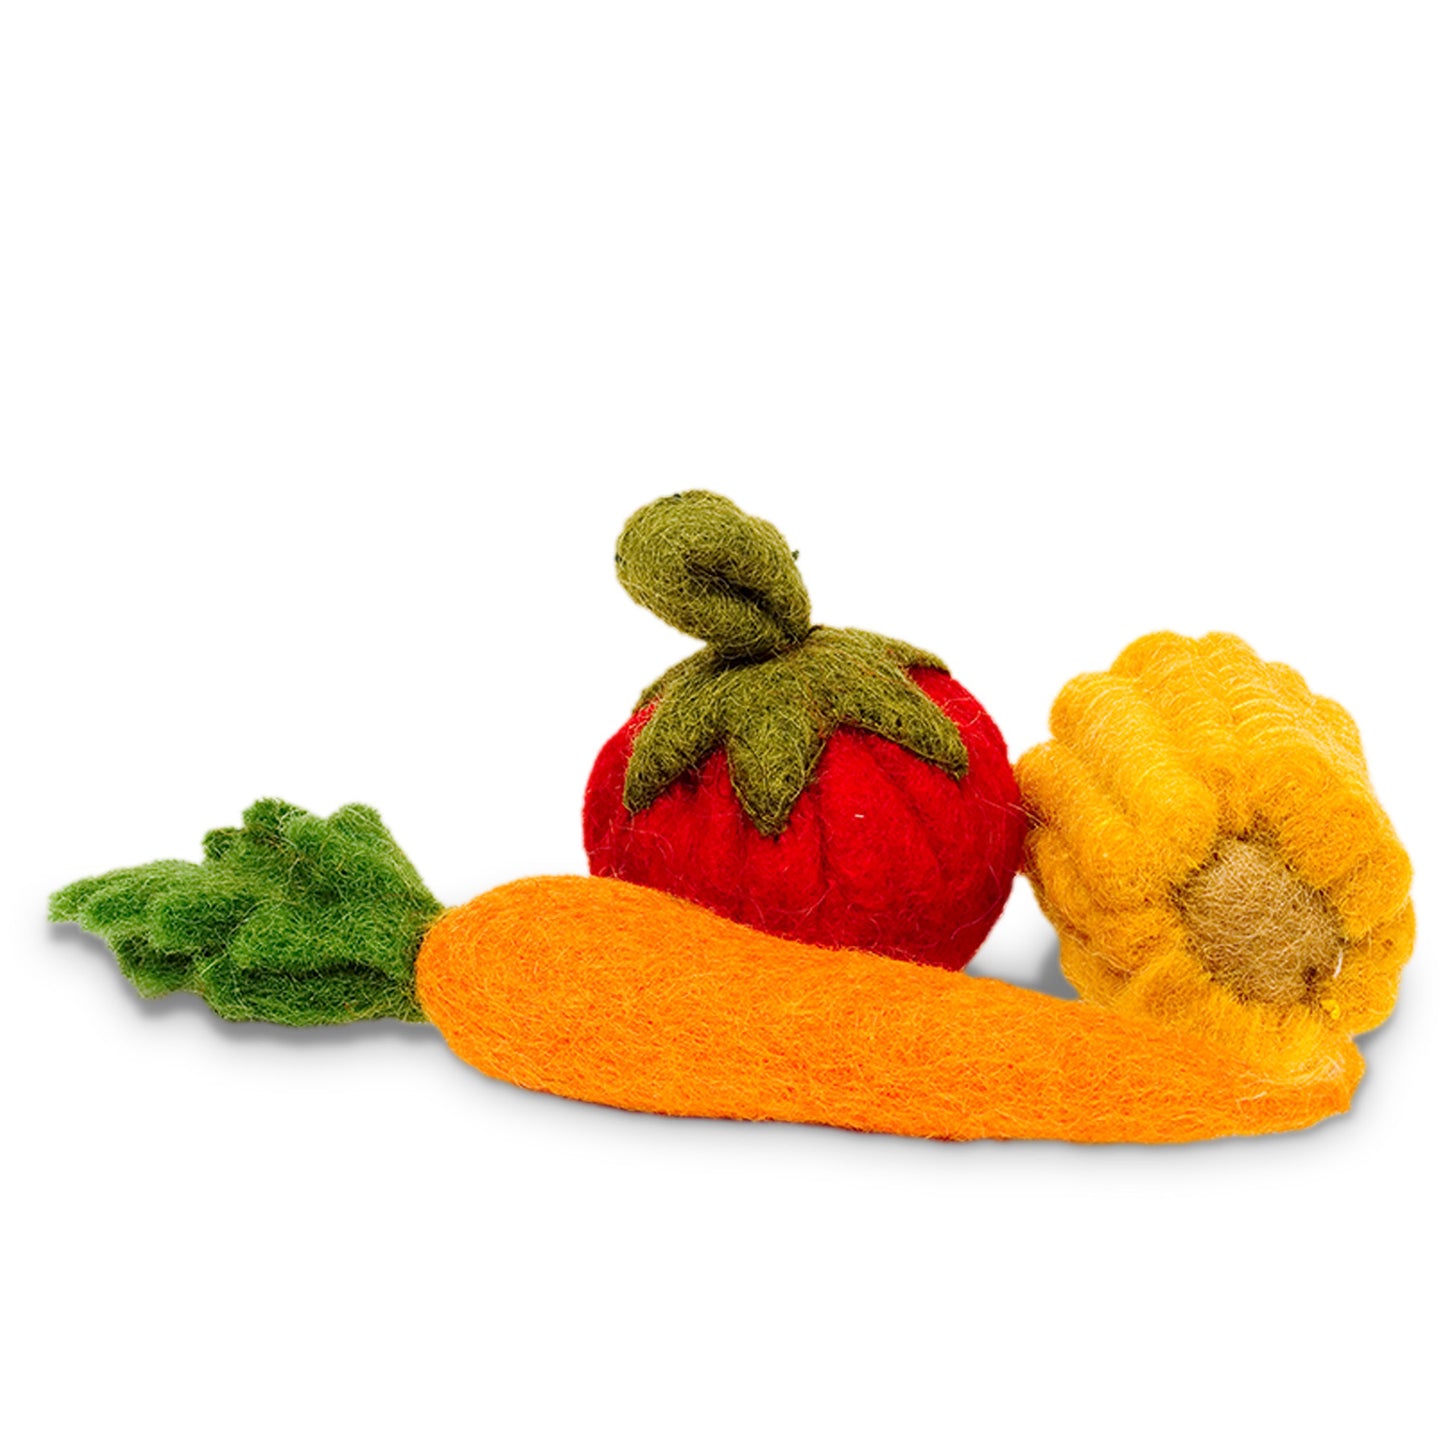 3" Veges, Pack of 3 Toys